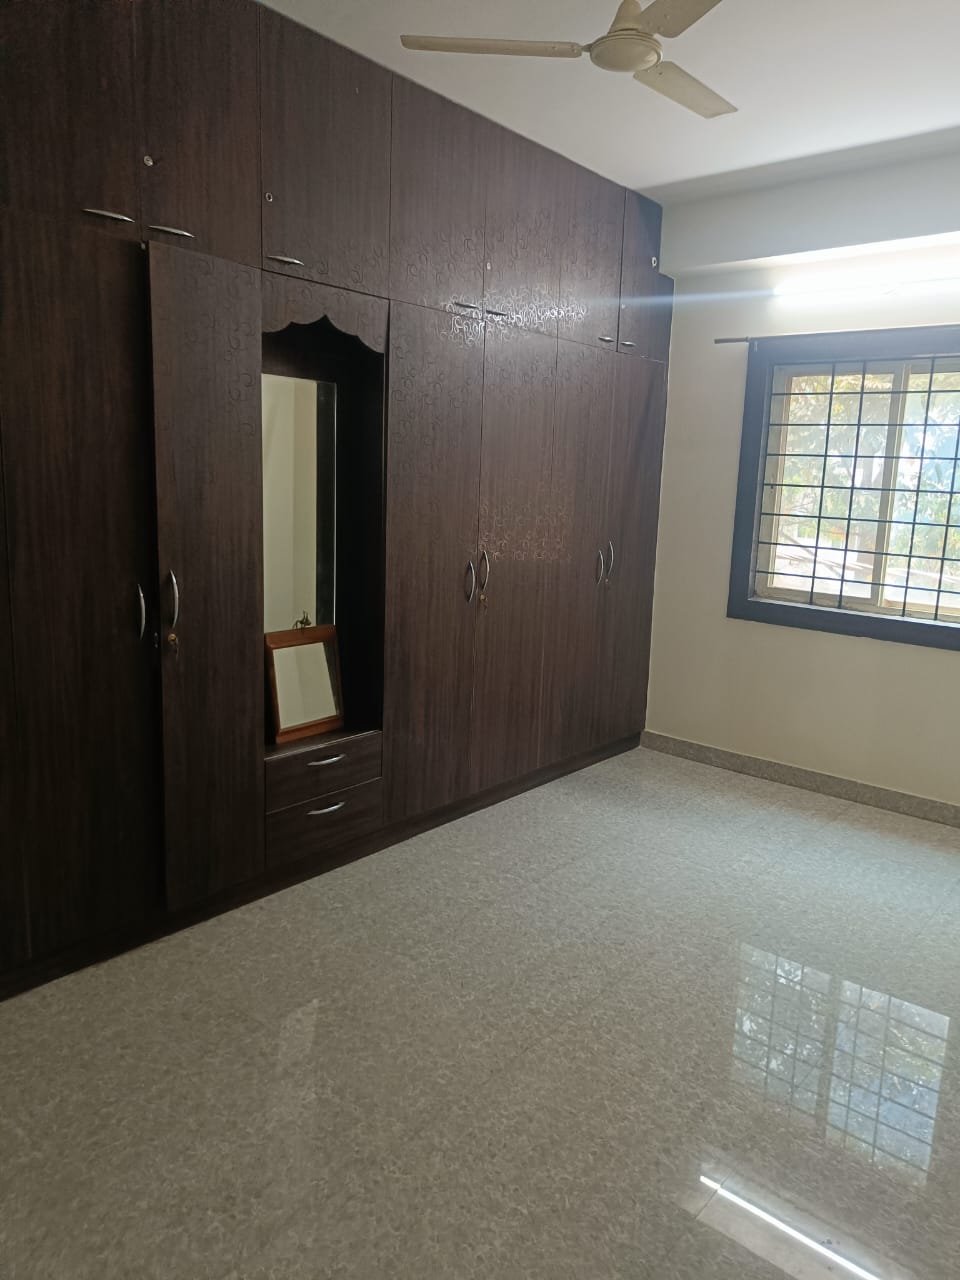 1 BHK Residential Apartment for Lease Only at JAML2 - 4190 in Vignana Nagar